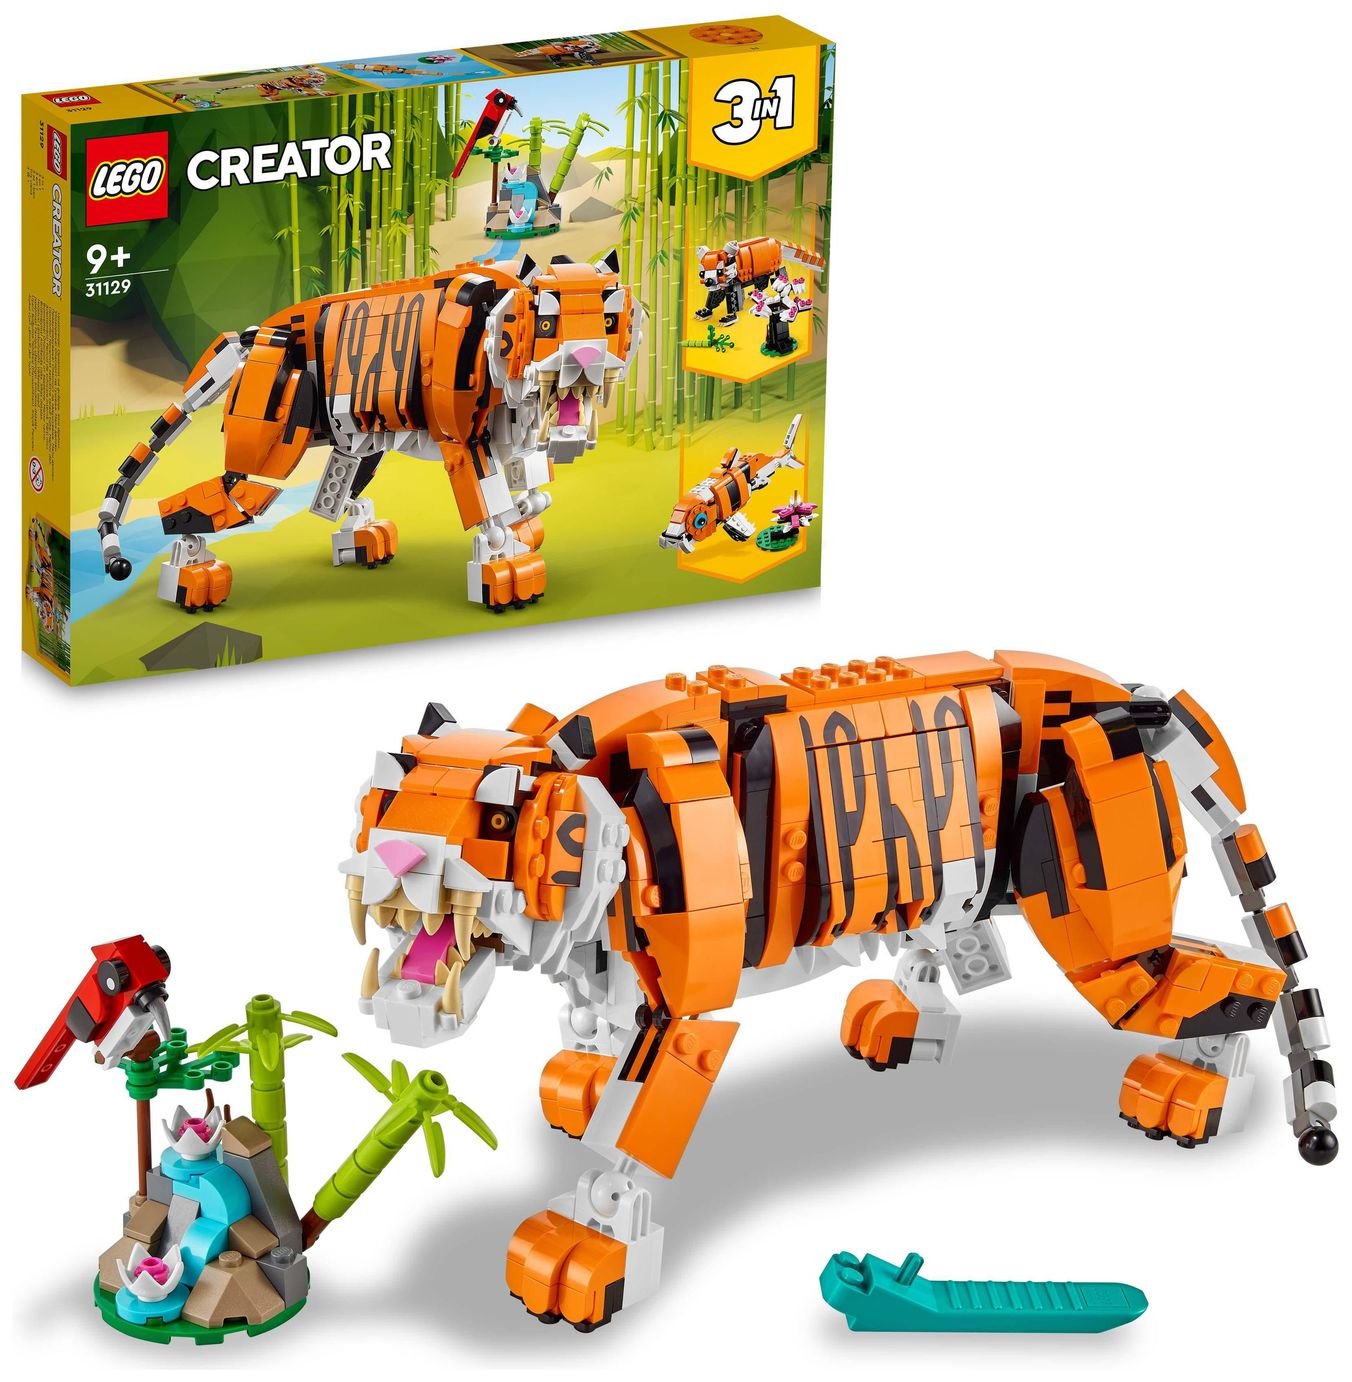 LEGO Creator 3in1 Majestic Tiger Animal Building Toy 31129